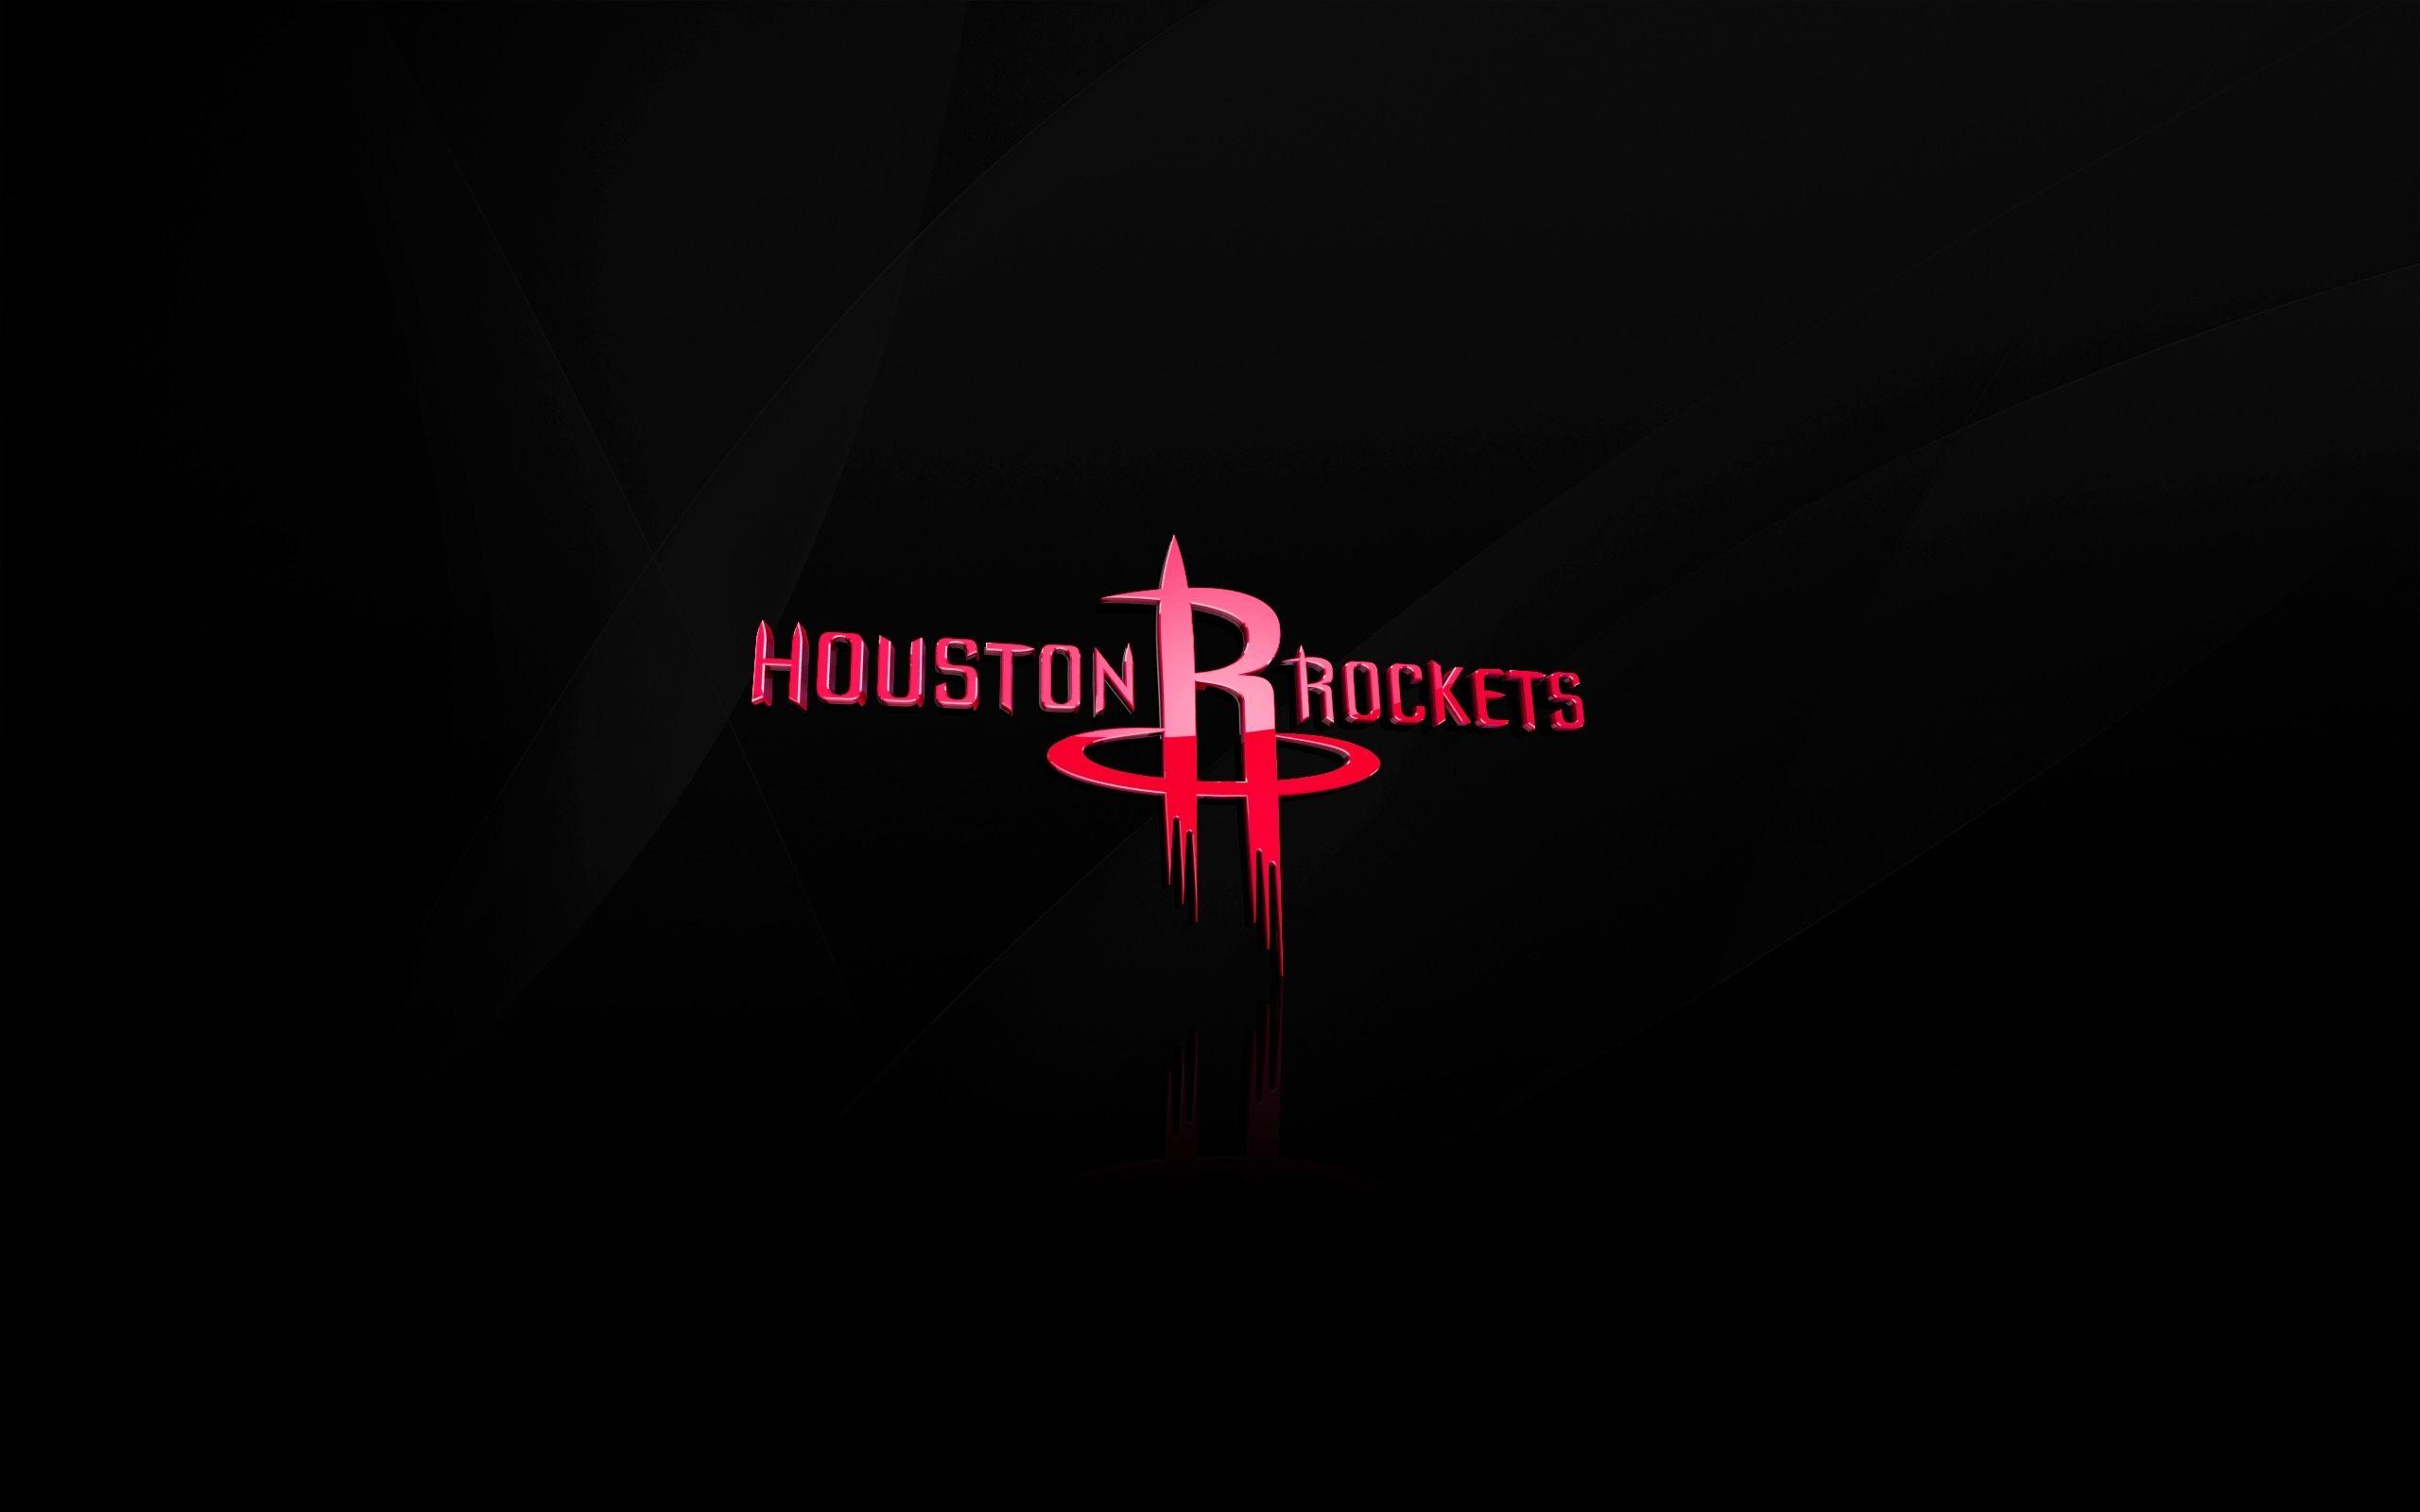 Houston Rockets Are Said to Sell for NBA Record $2.2 Billion